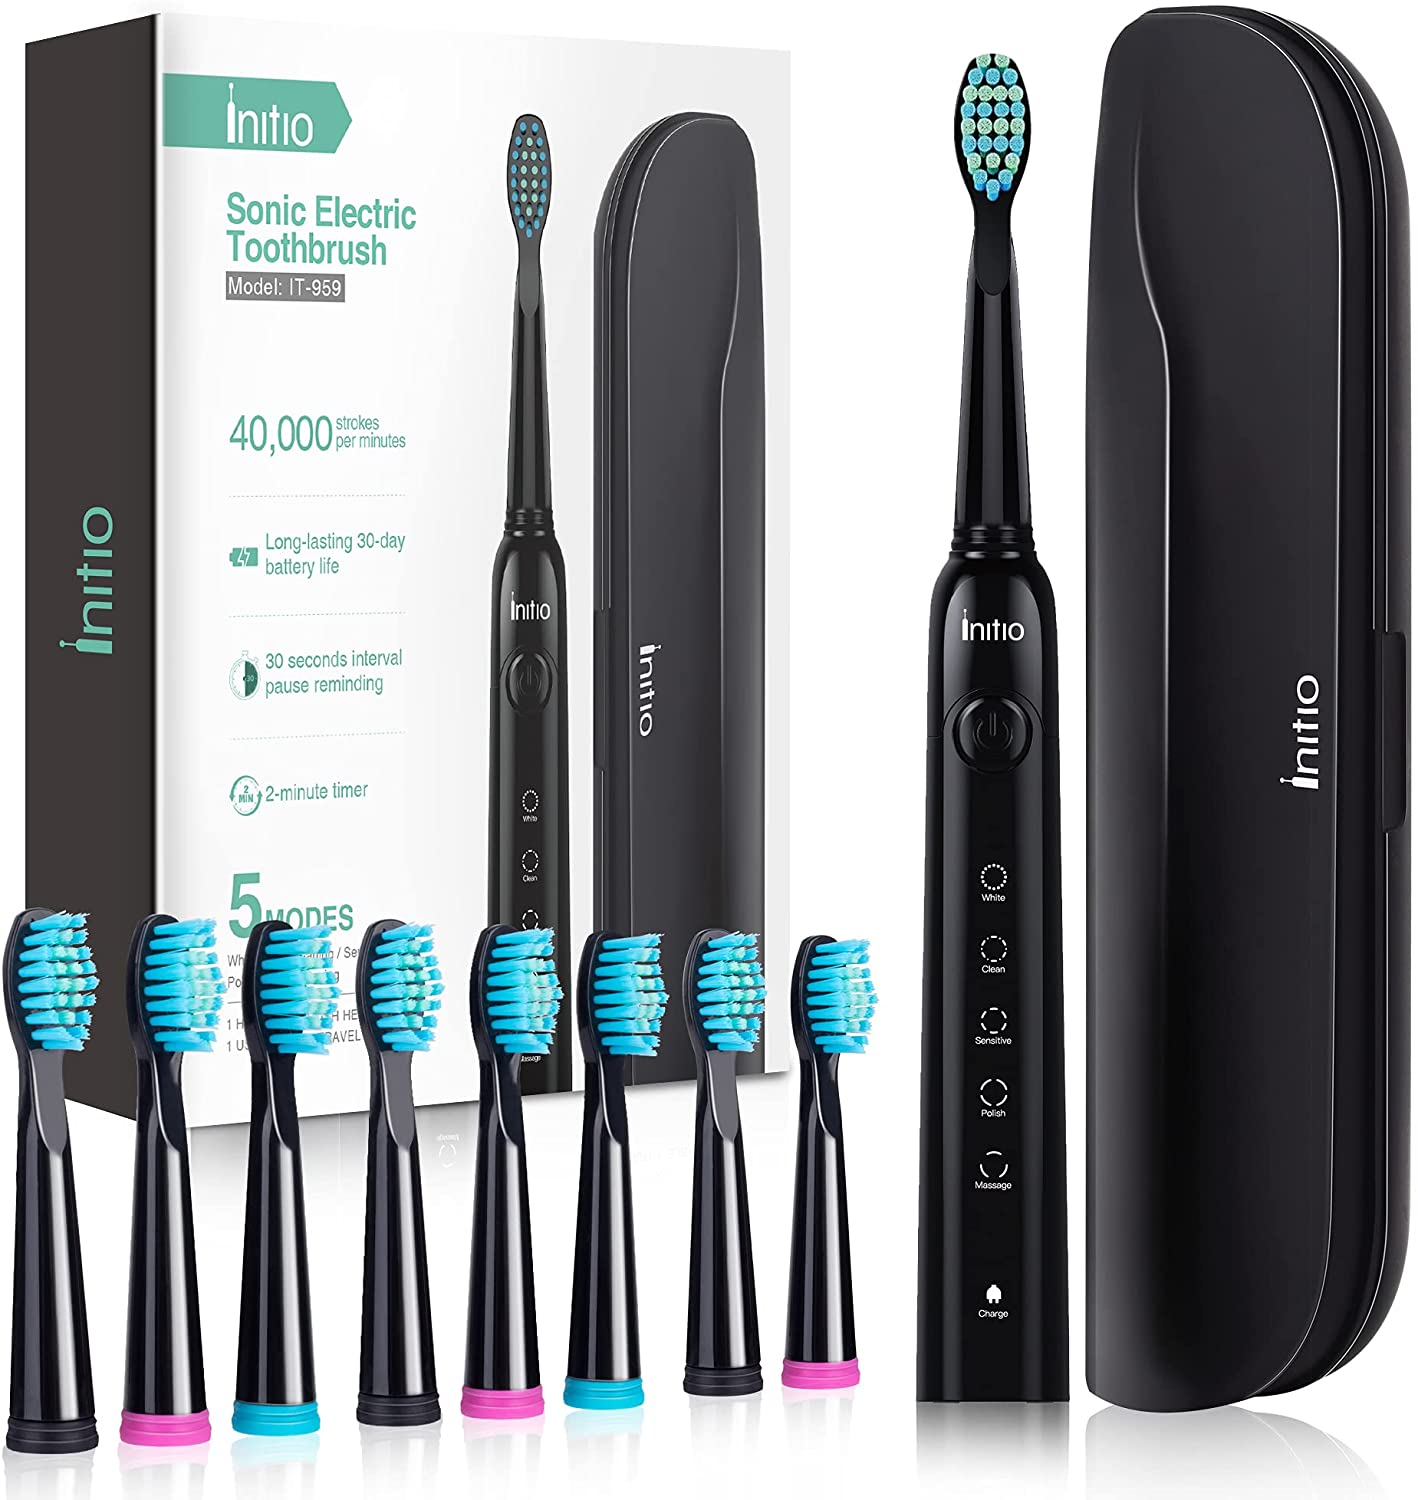 Initio Sonic Electric Toothbrush